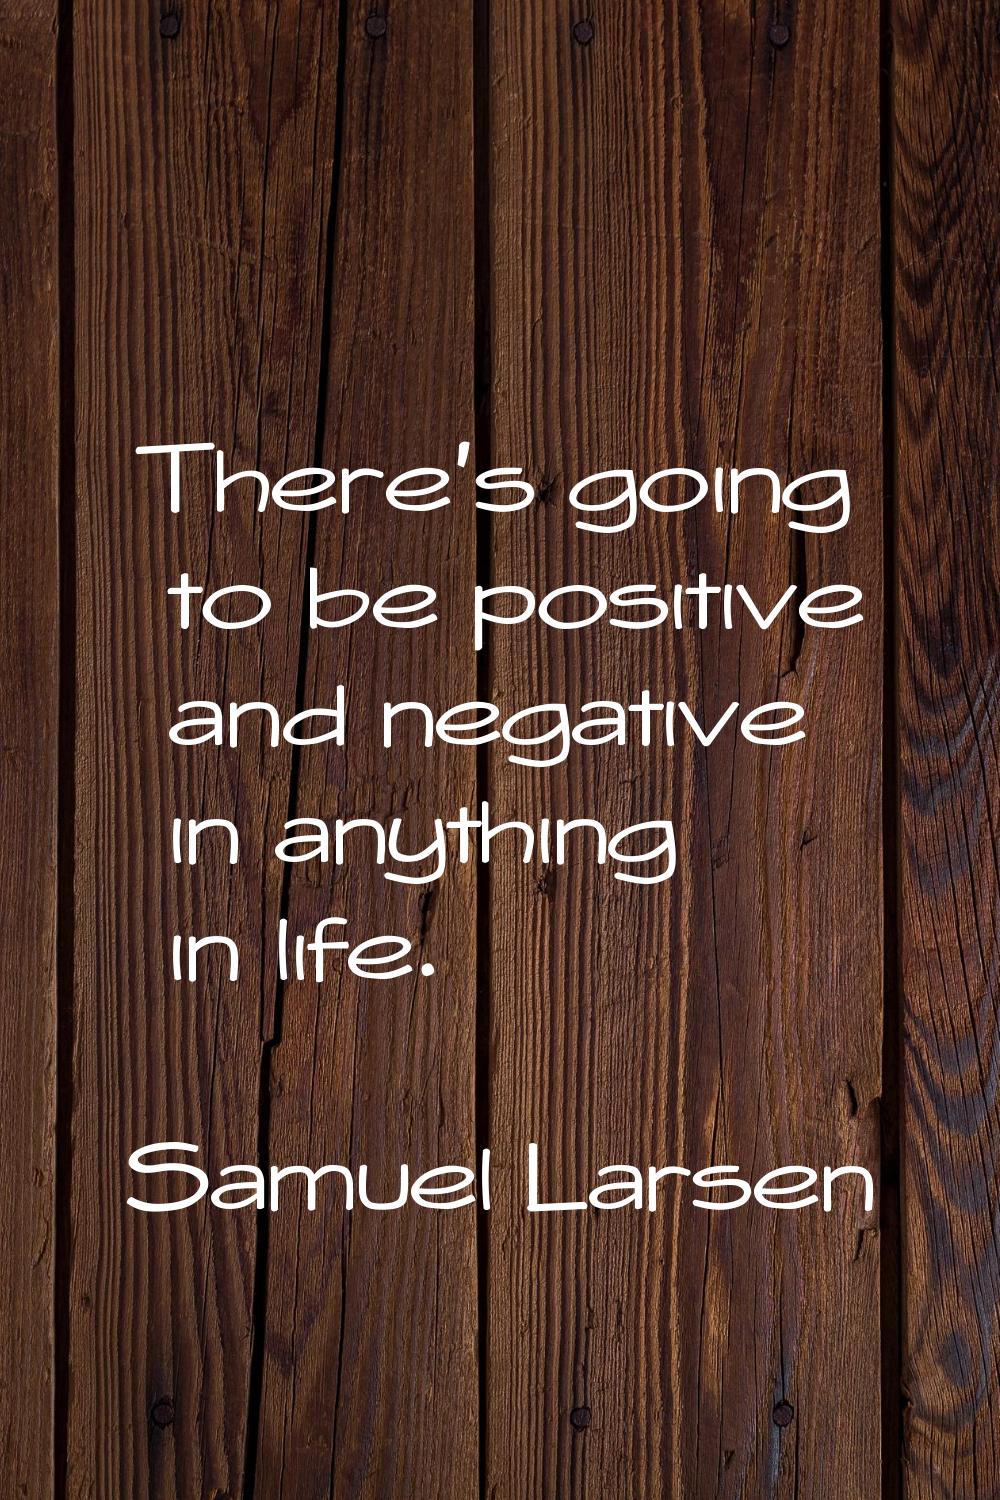 There's going to be positive and negative in anything in life.